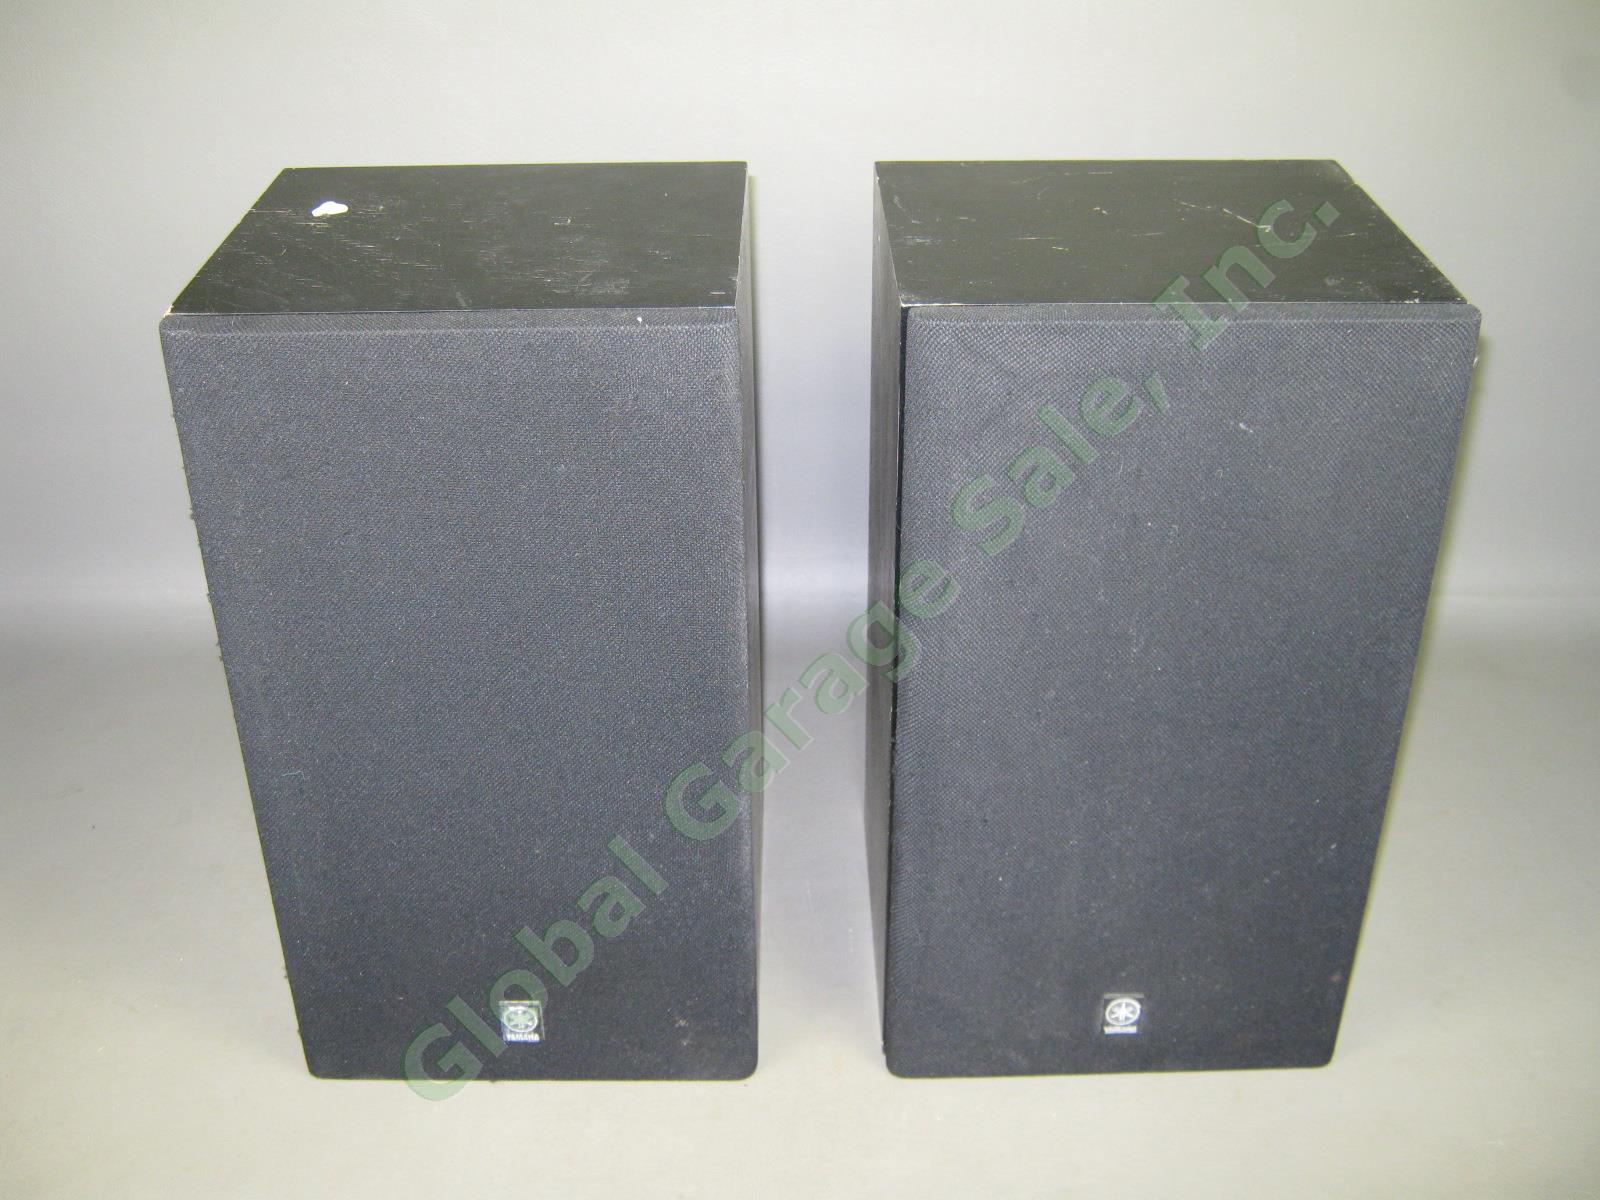 Yamaha NS-10m Studio Monitor Speakers Matching Pair Woofer Tweeter PARTS ONLY NR 3